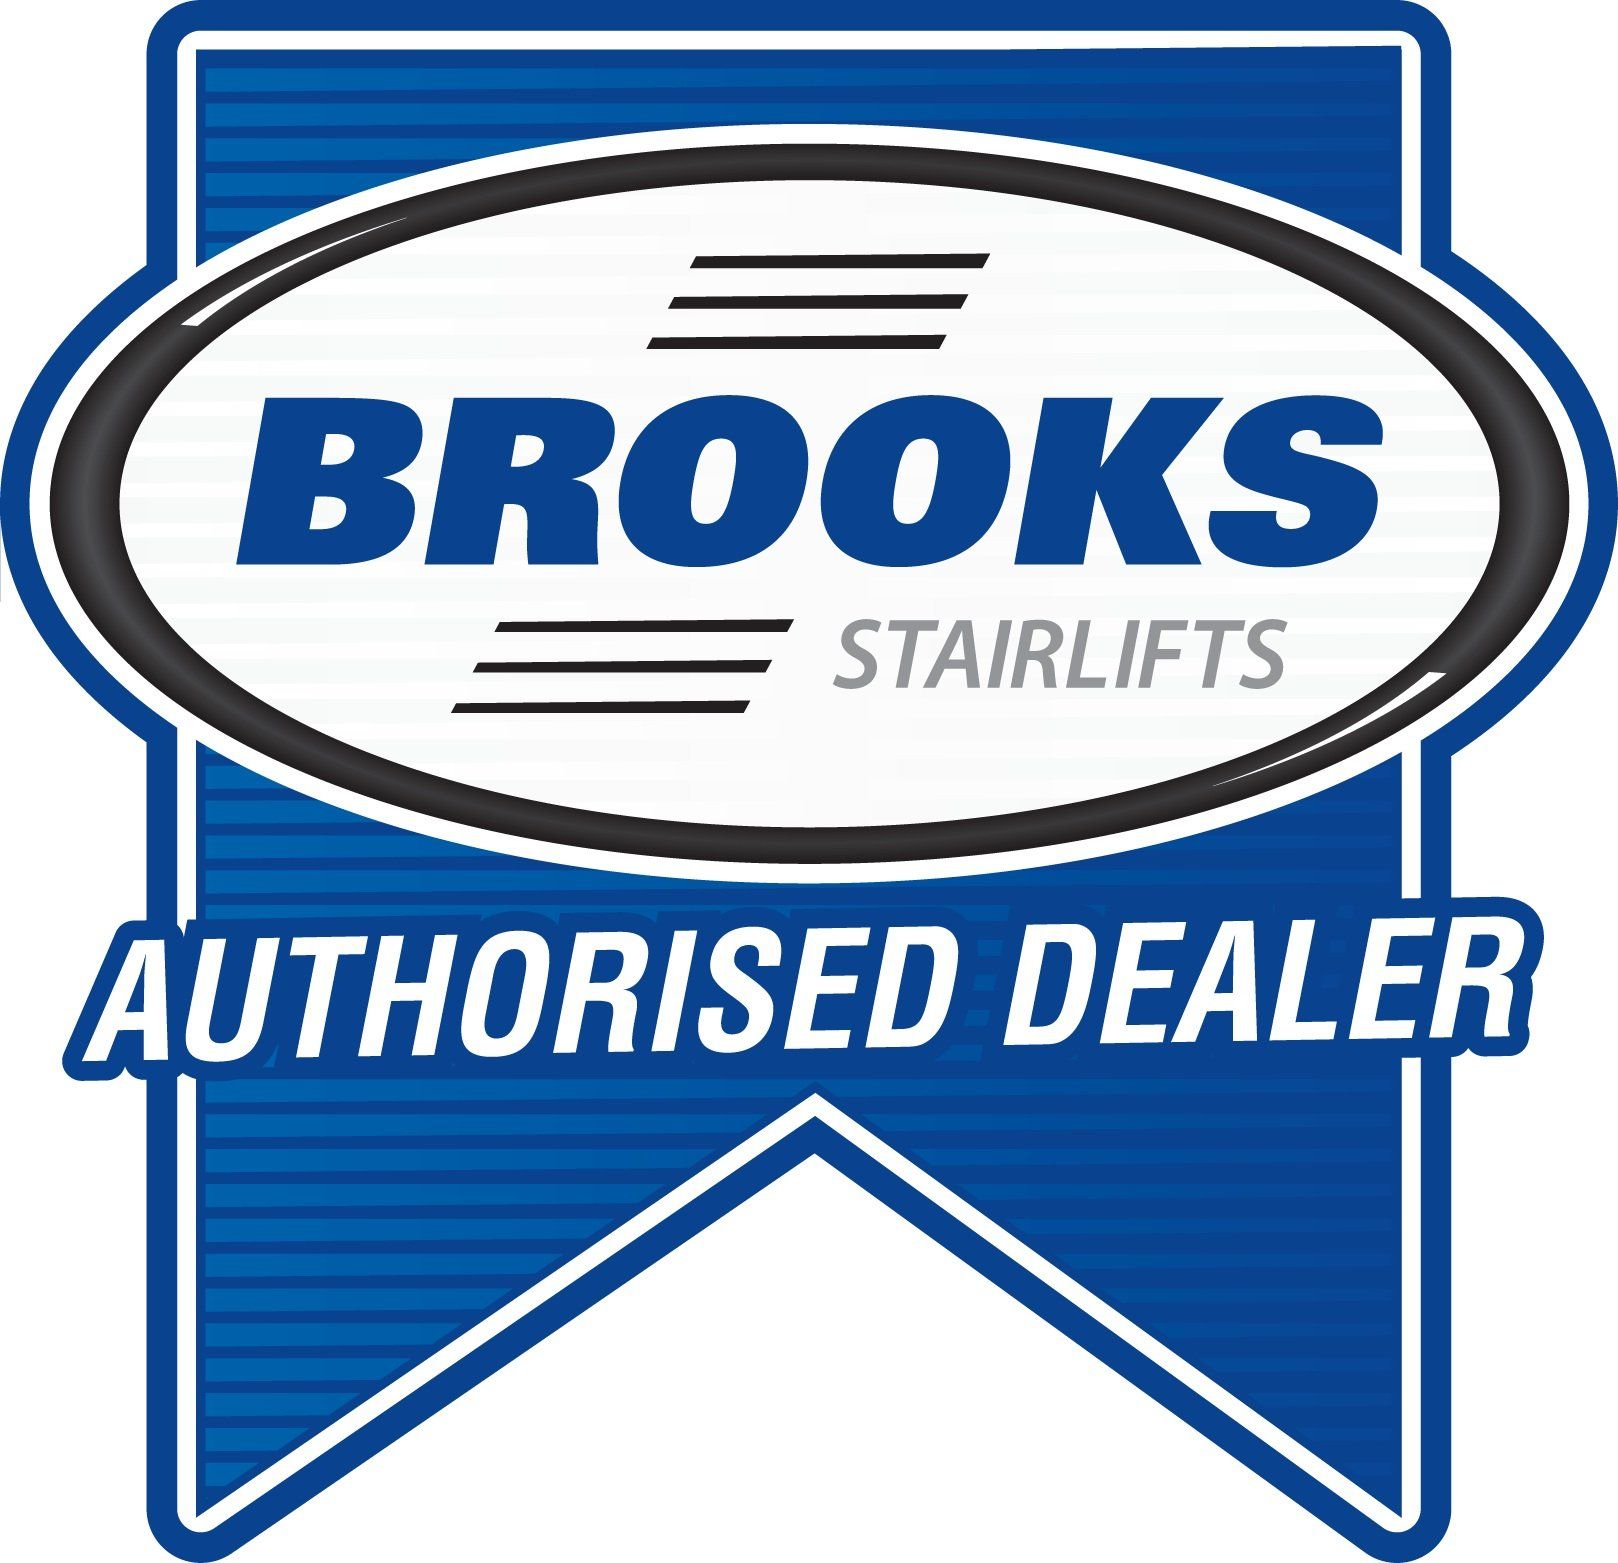 Brooks Stairlifts Merseyside - Helping Hand Stairlifts